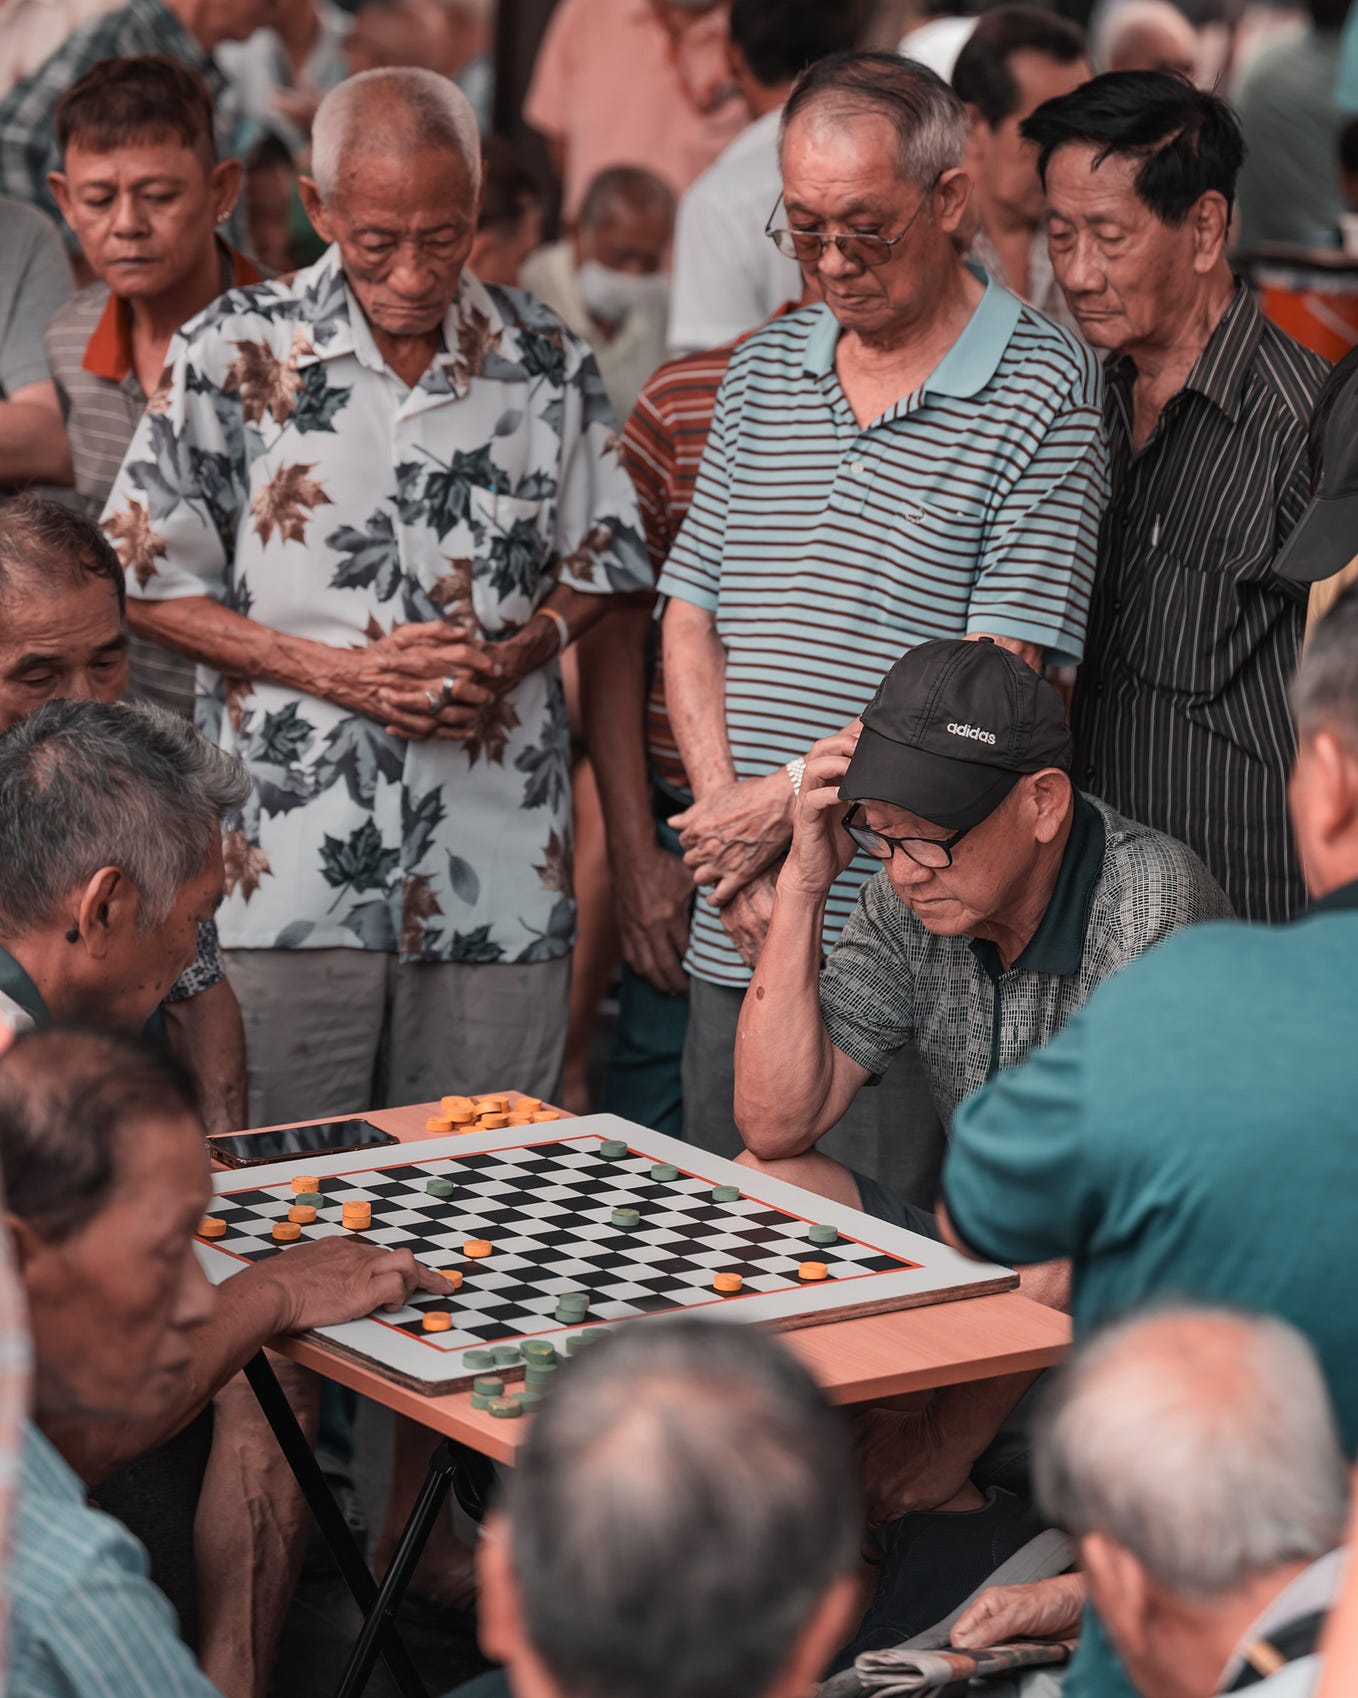 Street Photography in Chinatown, Singapore: Capturing the Charm of a Historic District